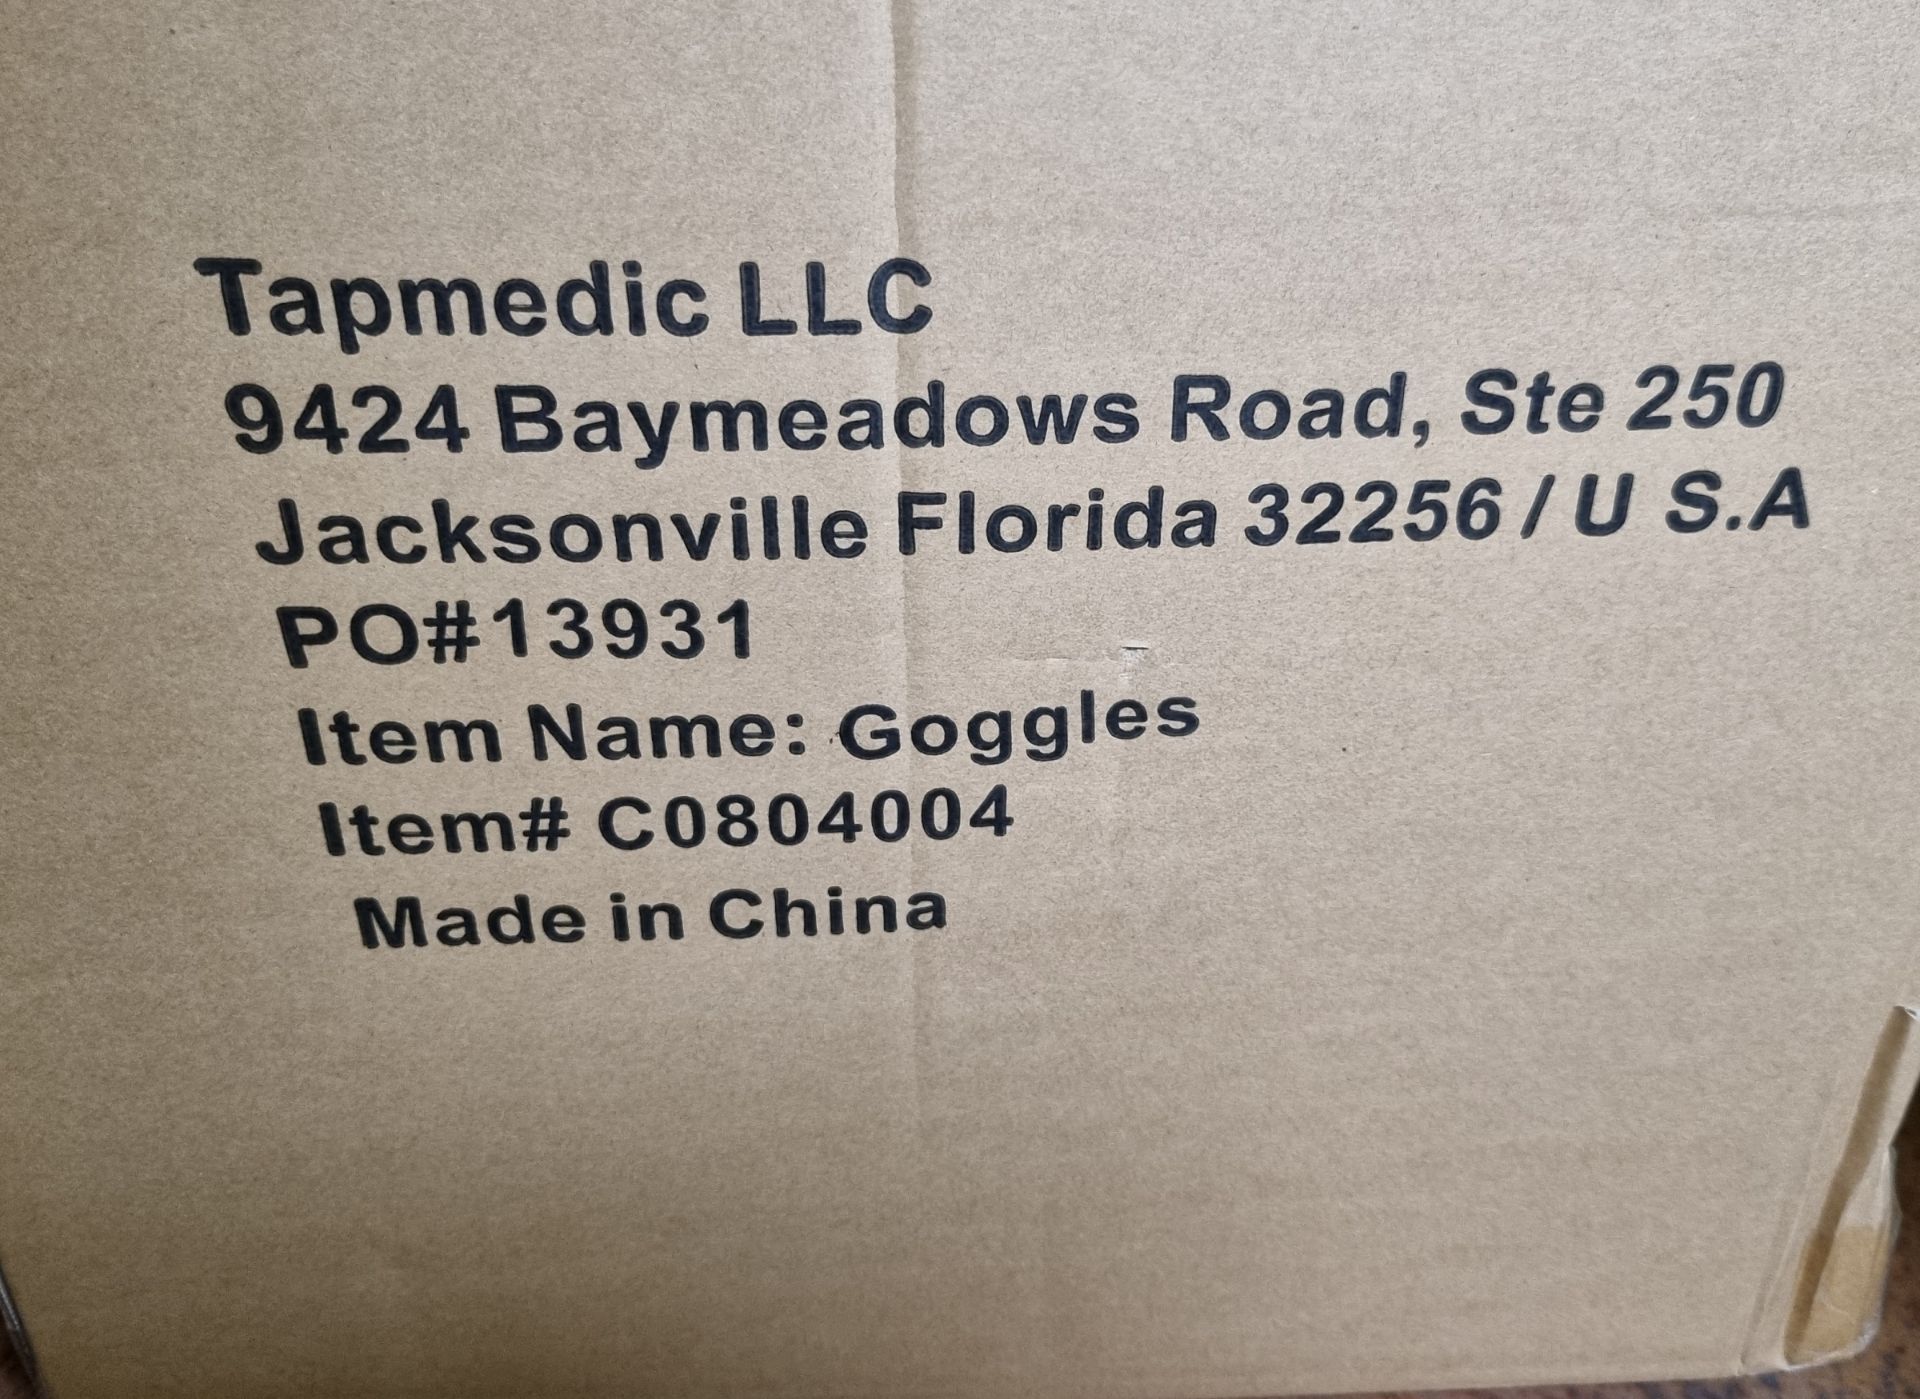 3x boxes of Tapmedic LLC safety goggles - 150 pairs per box - Image 2 of 5